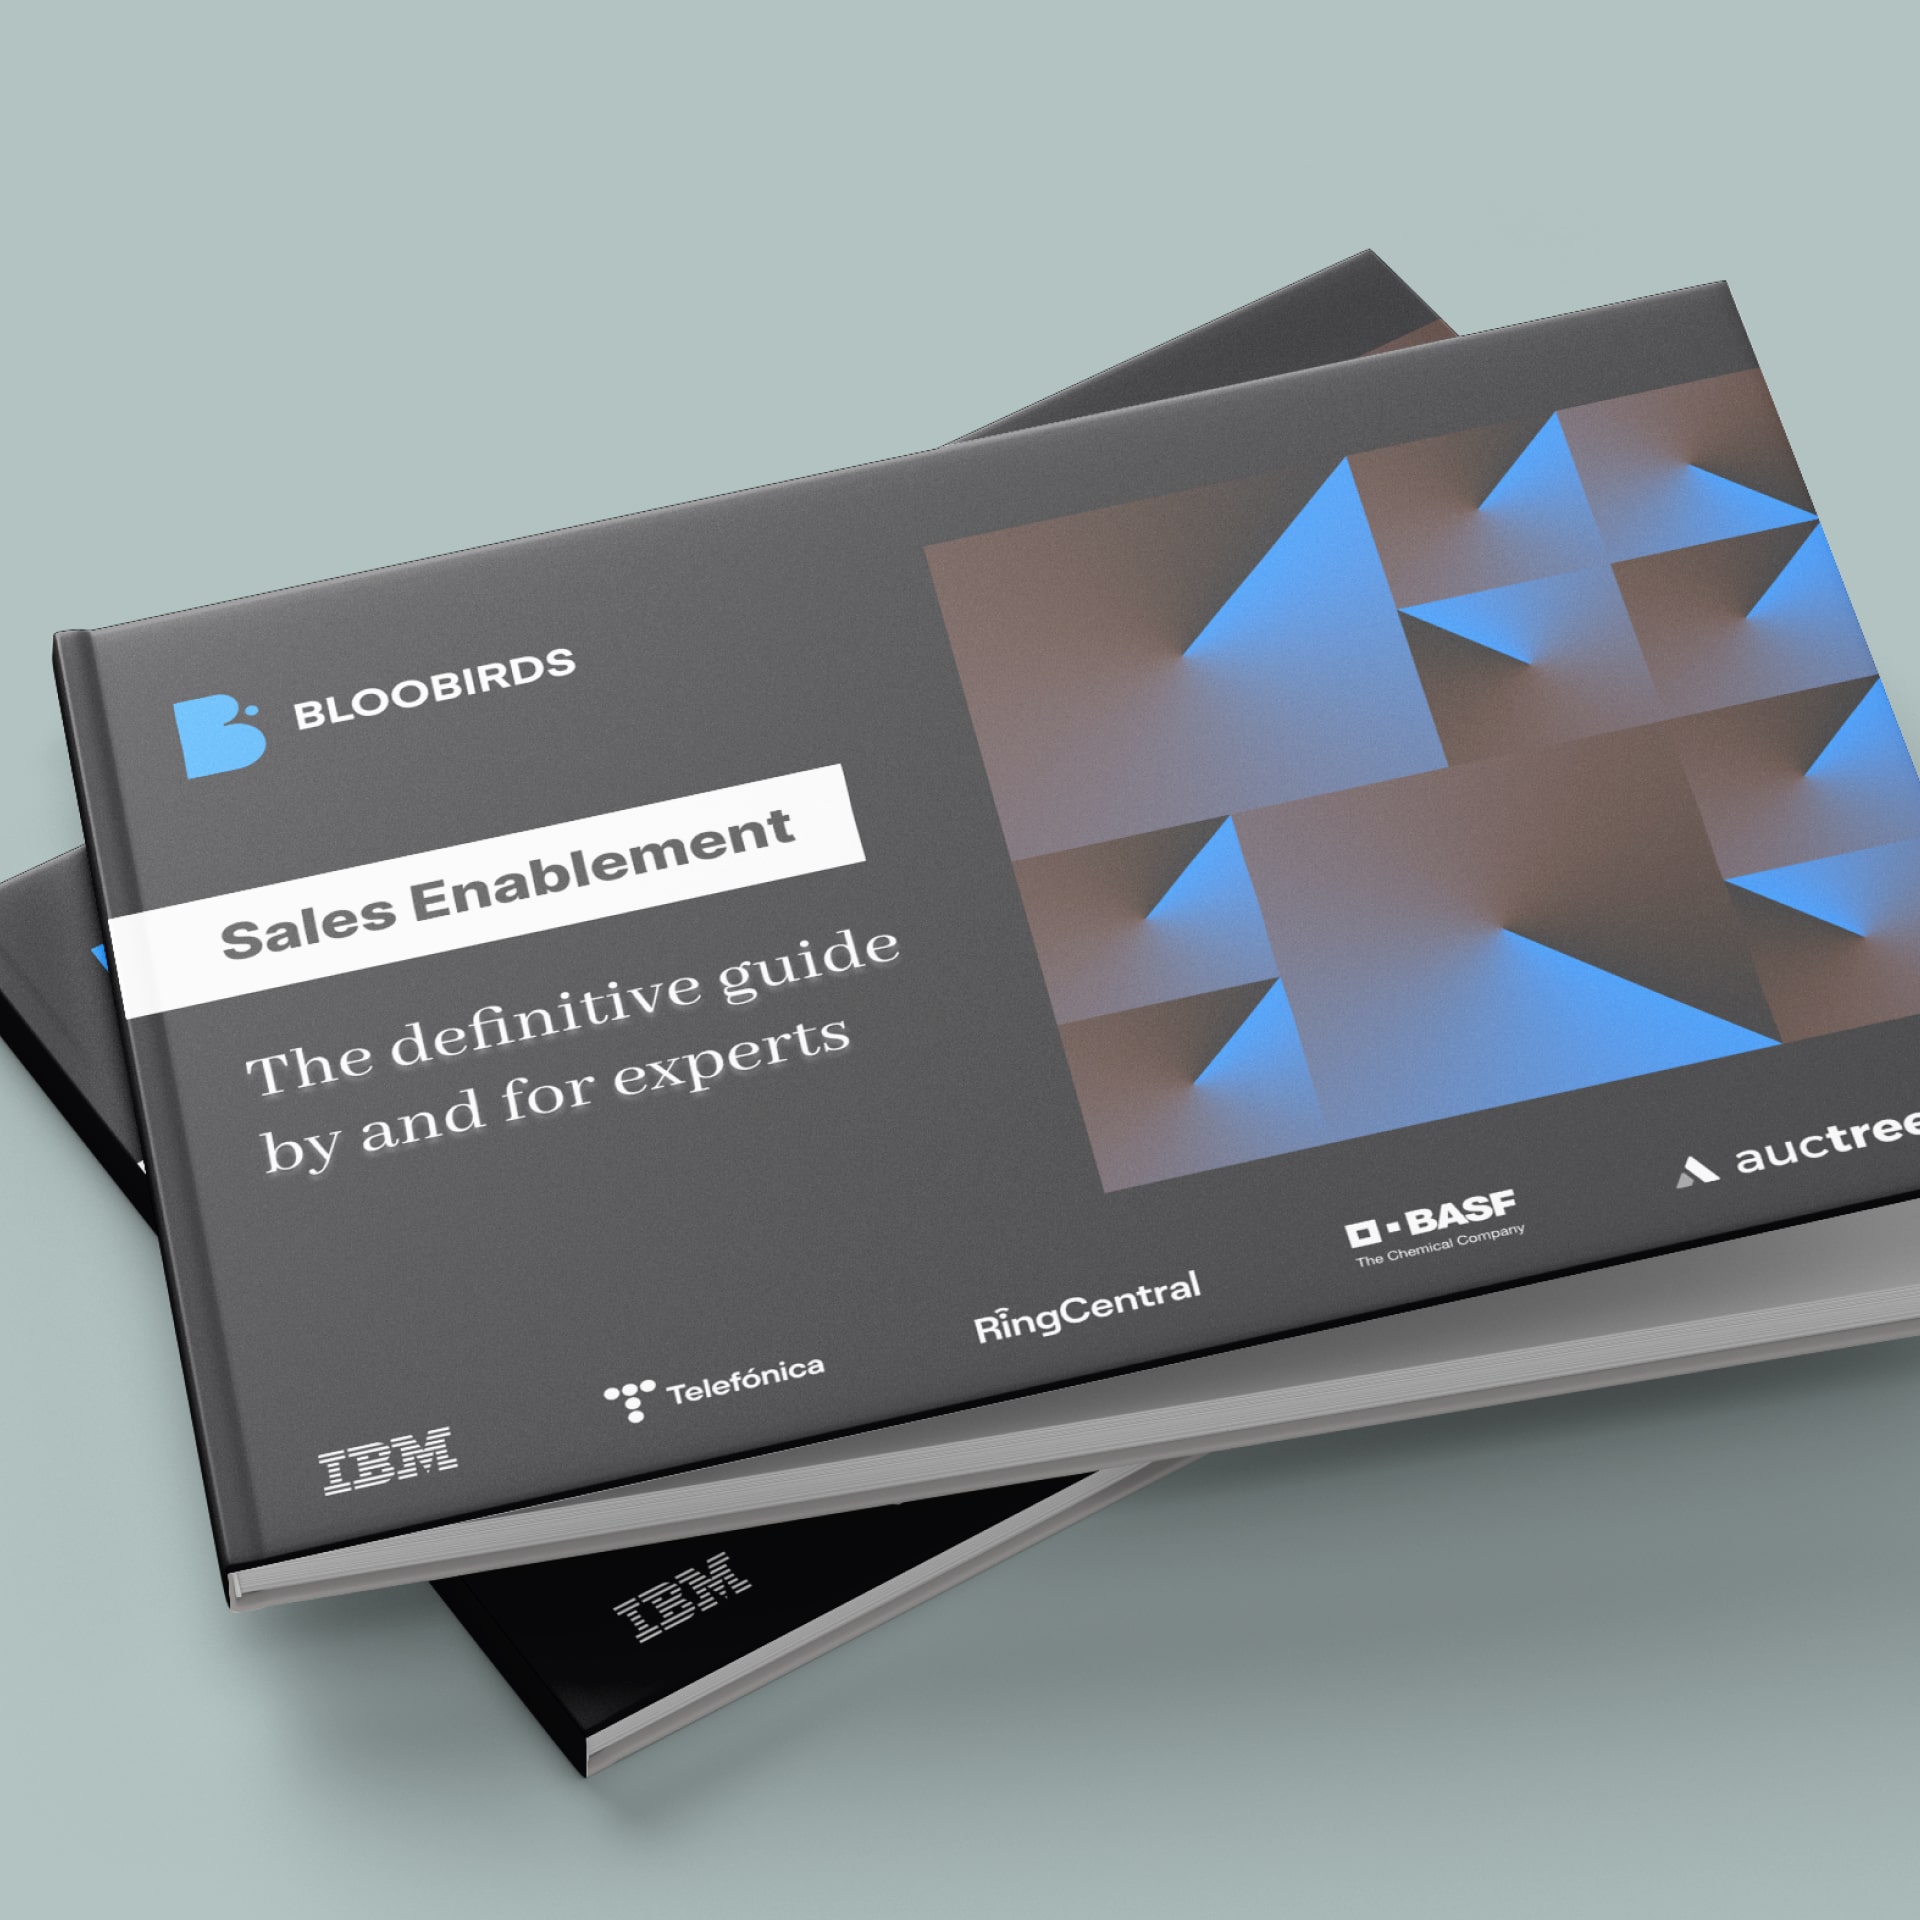 Sales Enablement, definitive guide by and for experts